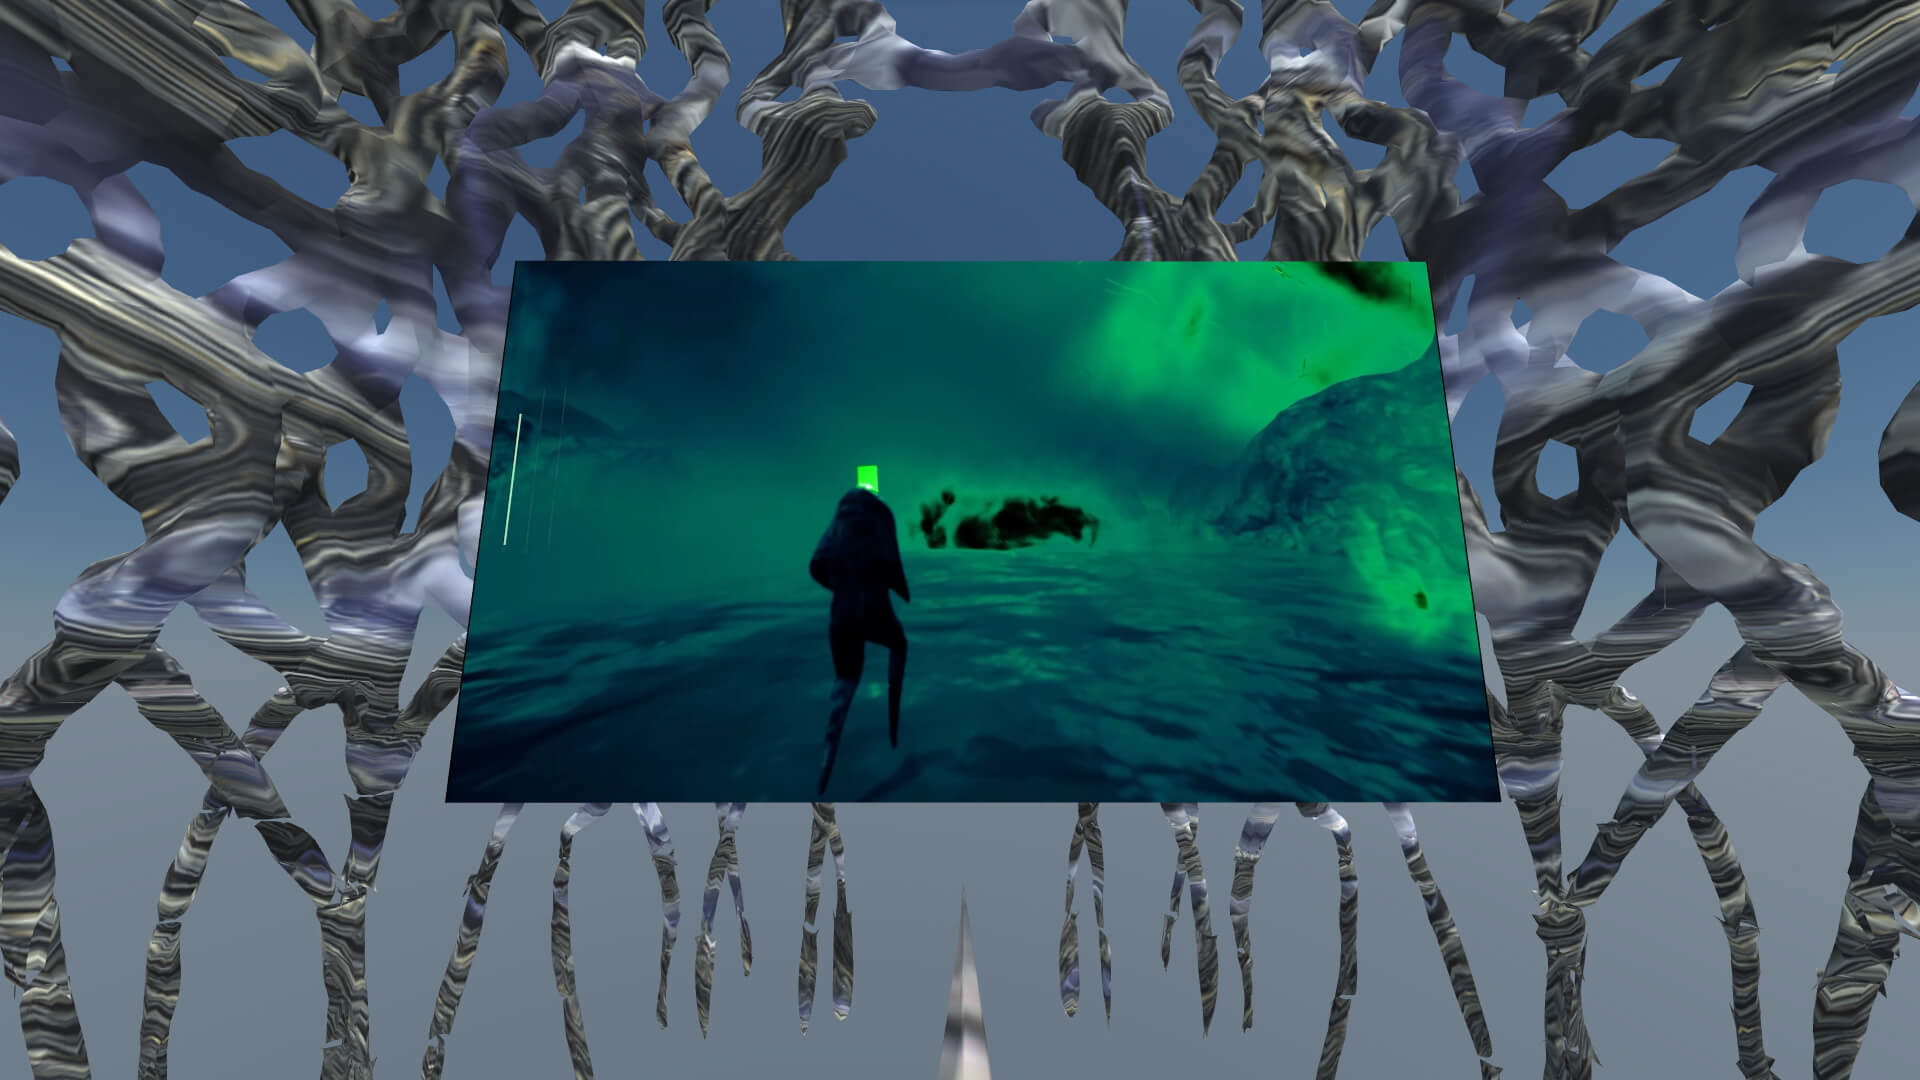 A still image of a scene in the metaverse, showing a 3D image of an avatar in a video game standing